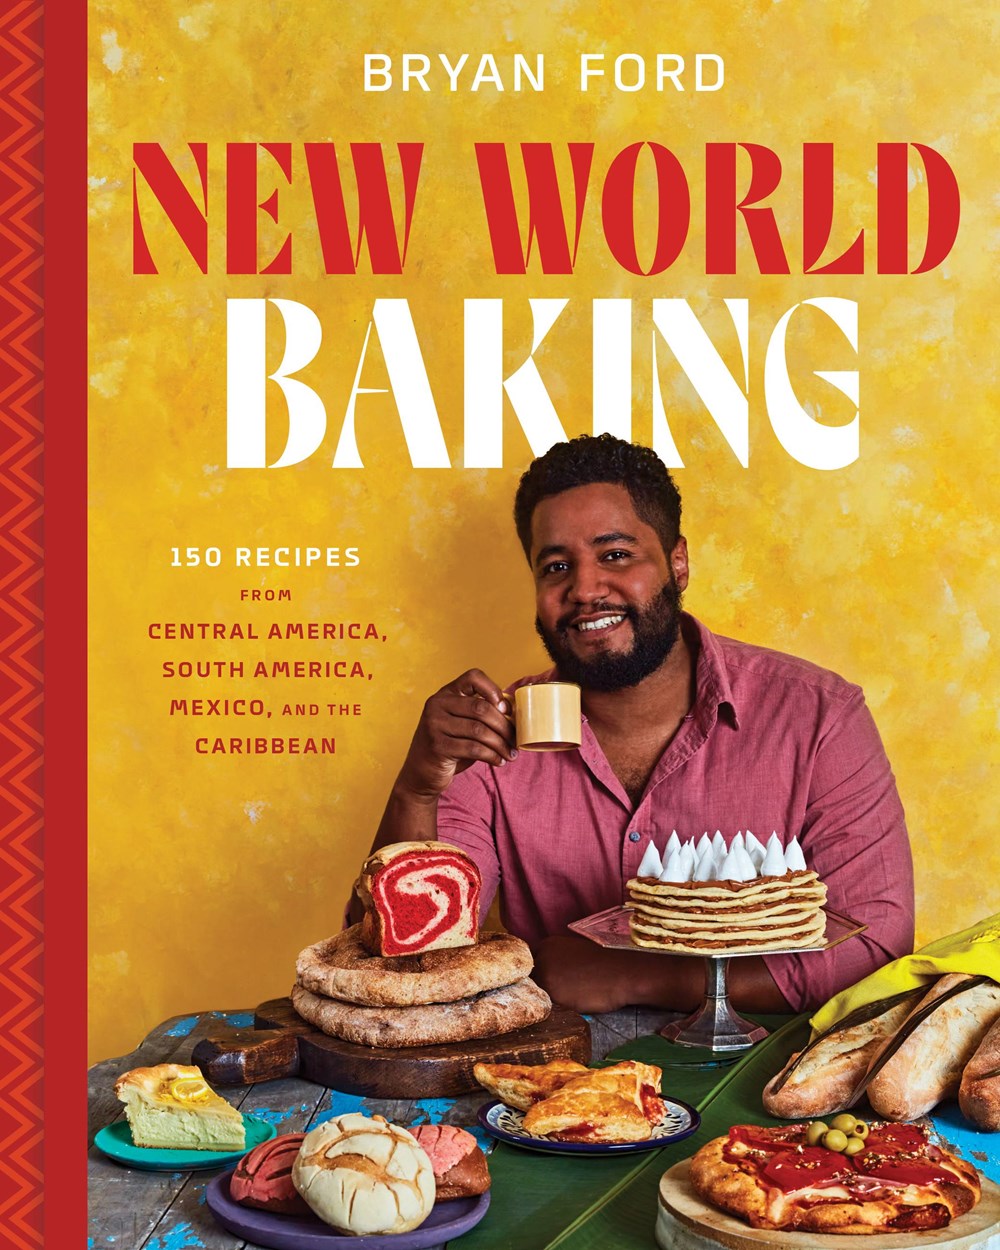 PRE-ORDER: New World Baking: 150 Recipes from Central America, South America, Mexico, and the Caribbean